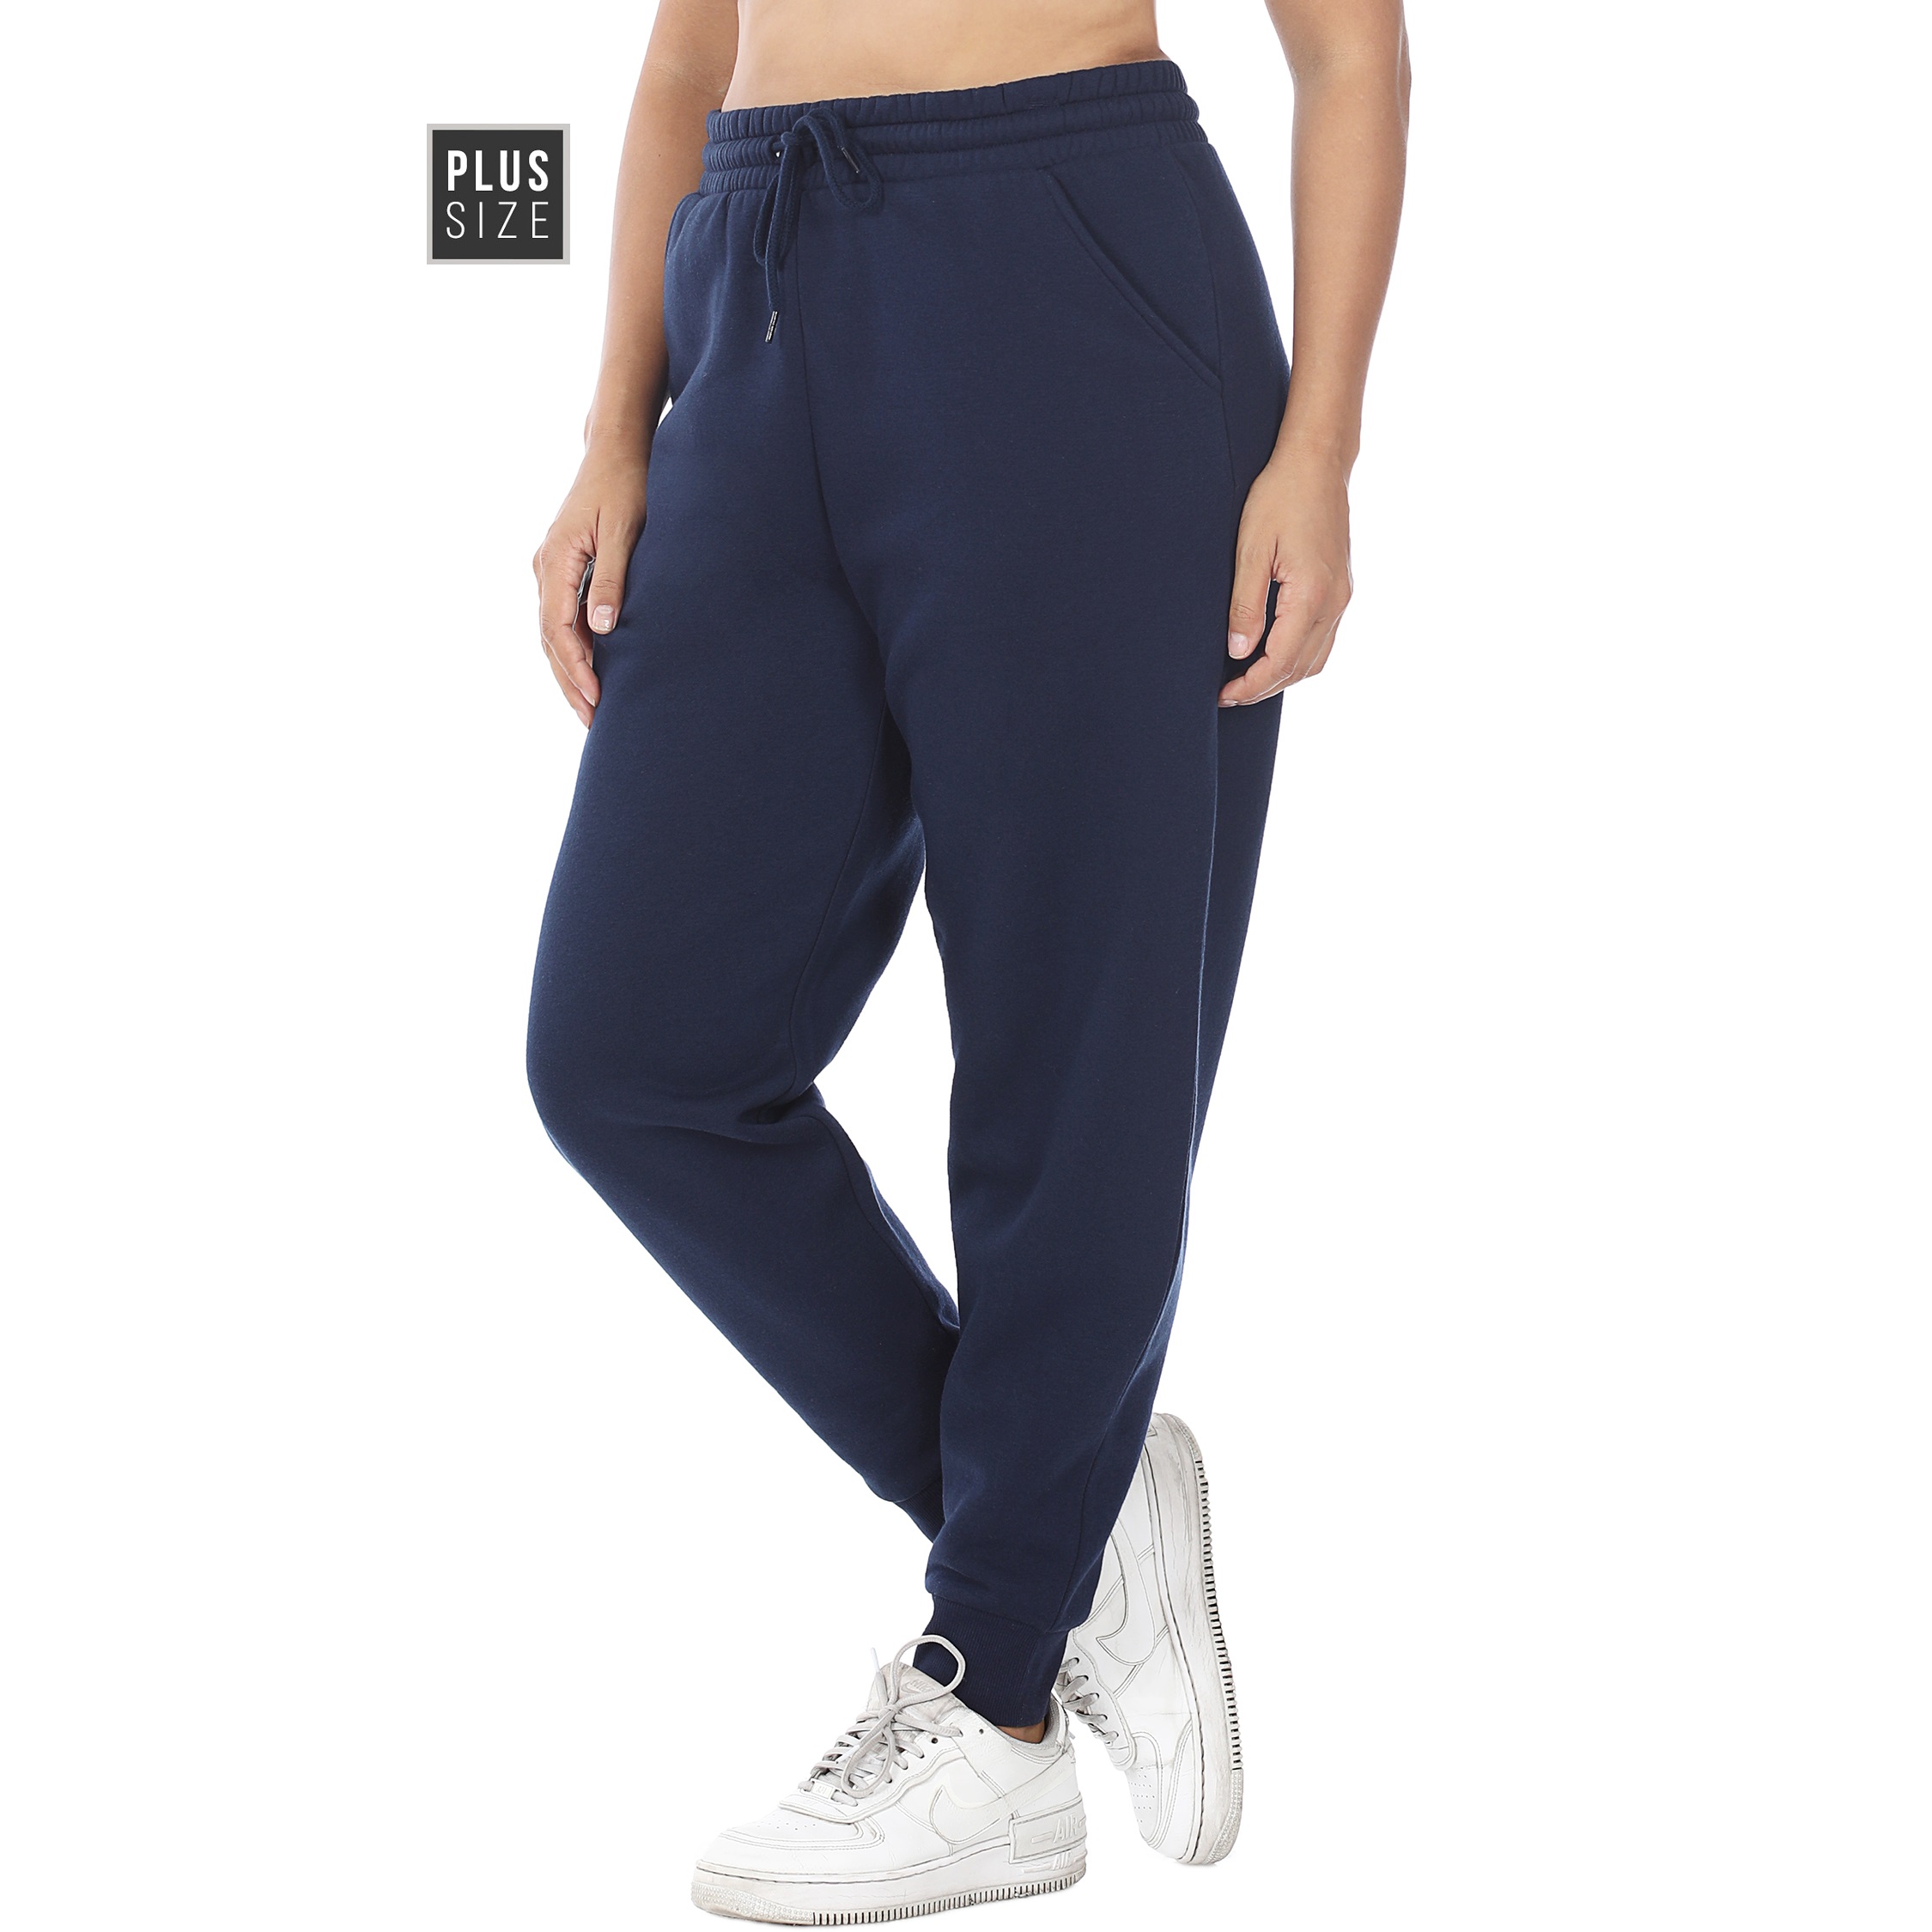 Women's Plus Size Sweatpants Joggers - Workout Pants Loose Fit Relaxed ...